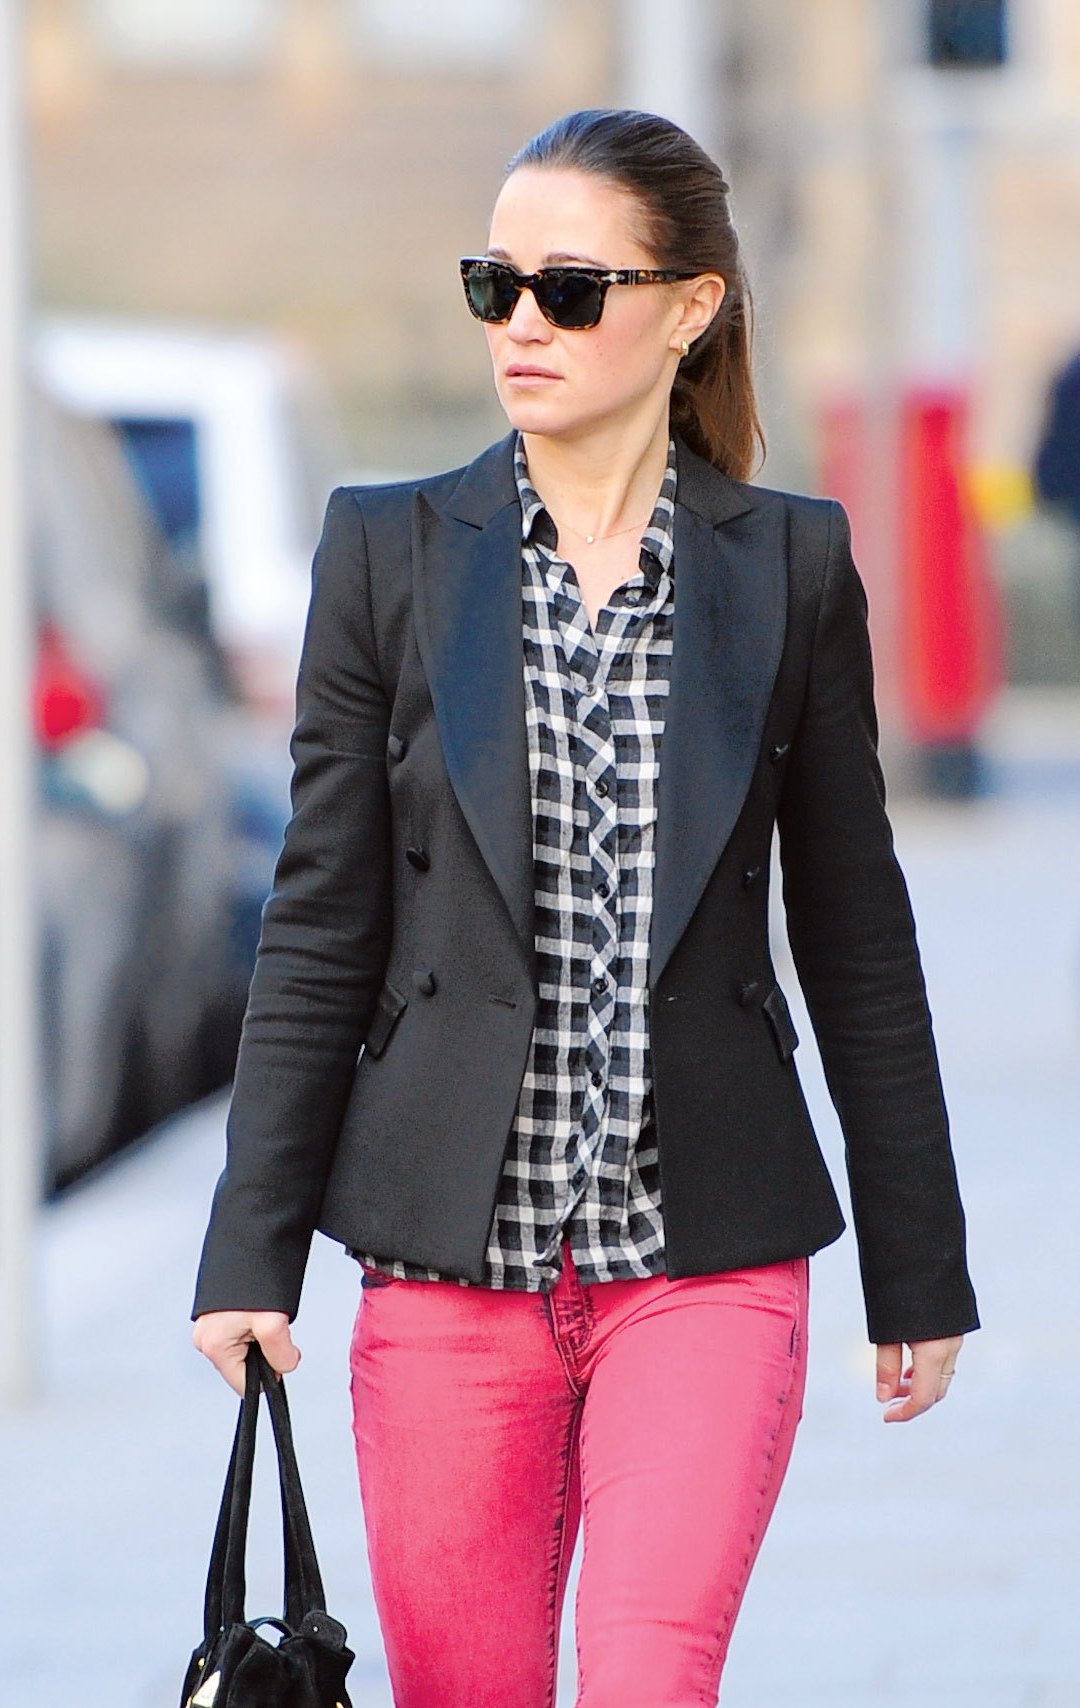 Blazer Outfits for Women